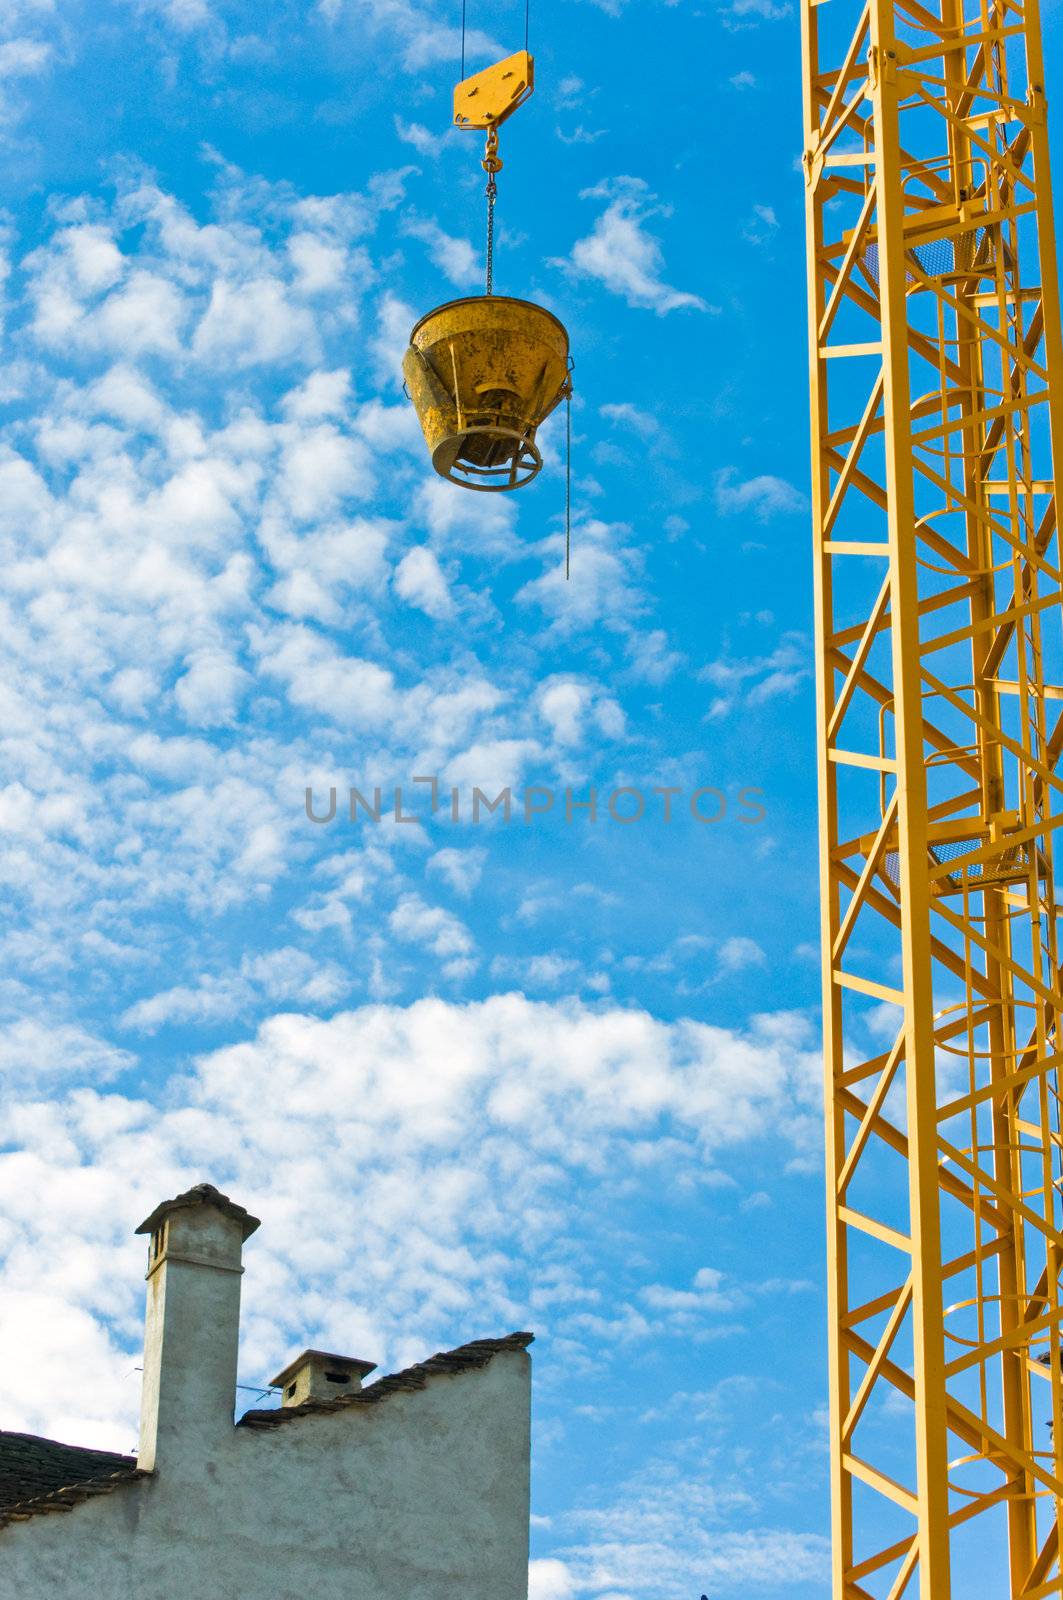 Yellow crane near building standing against blue sky with fluffy clouds.